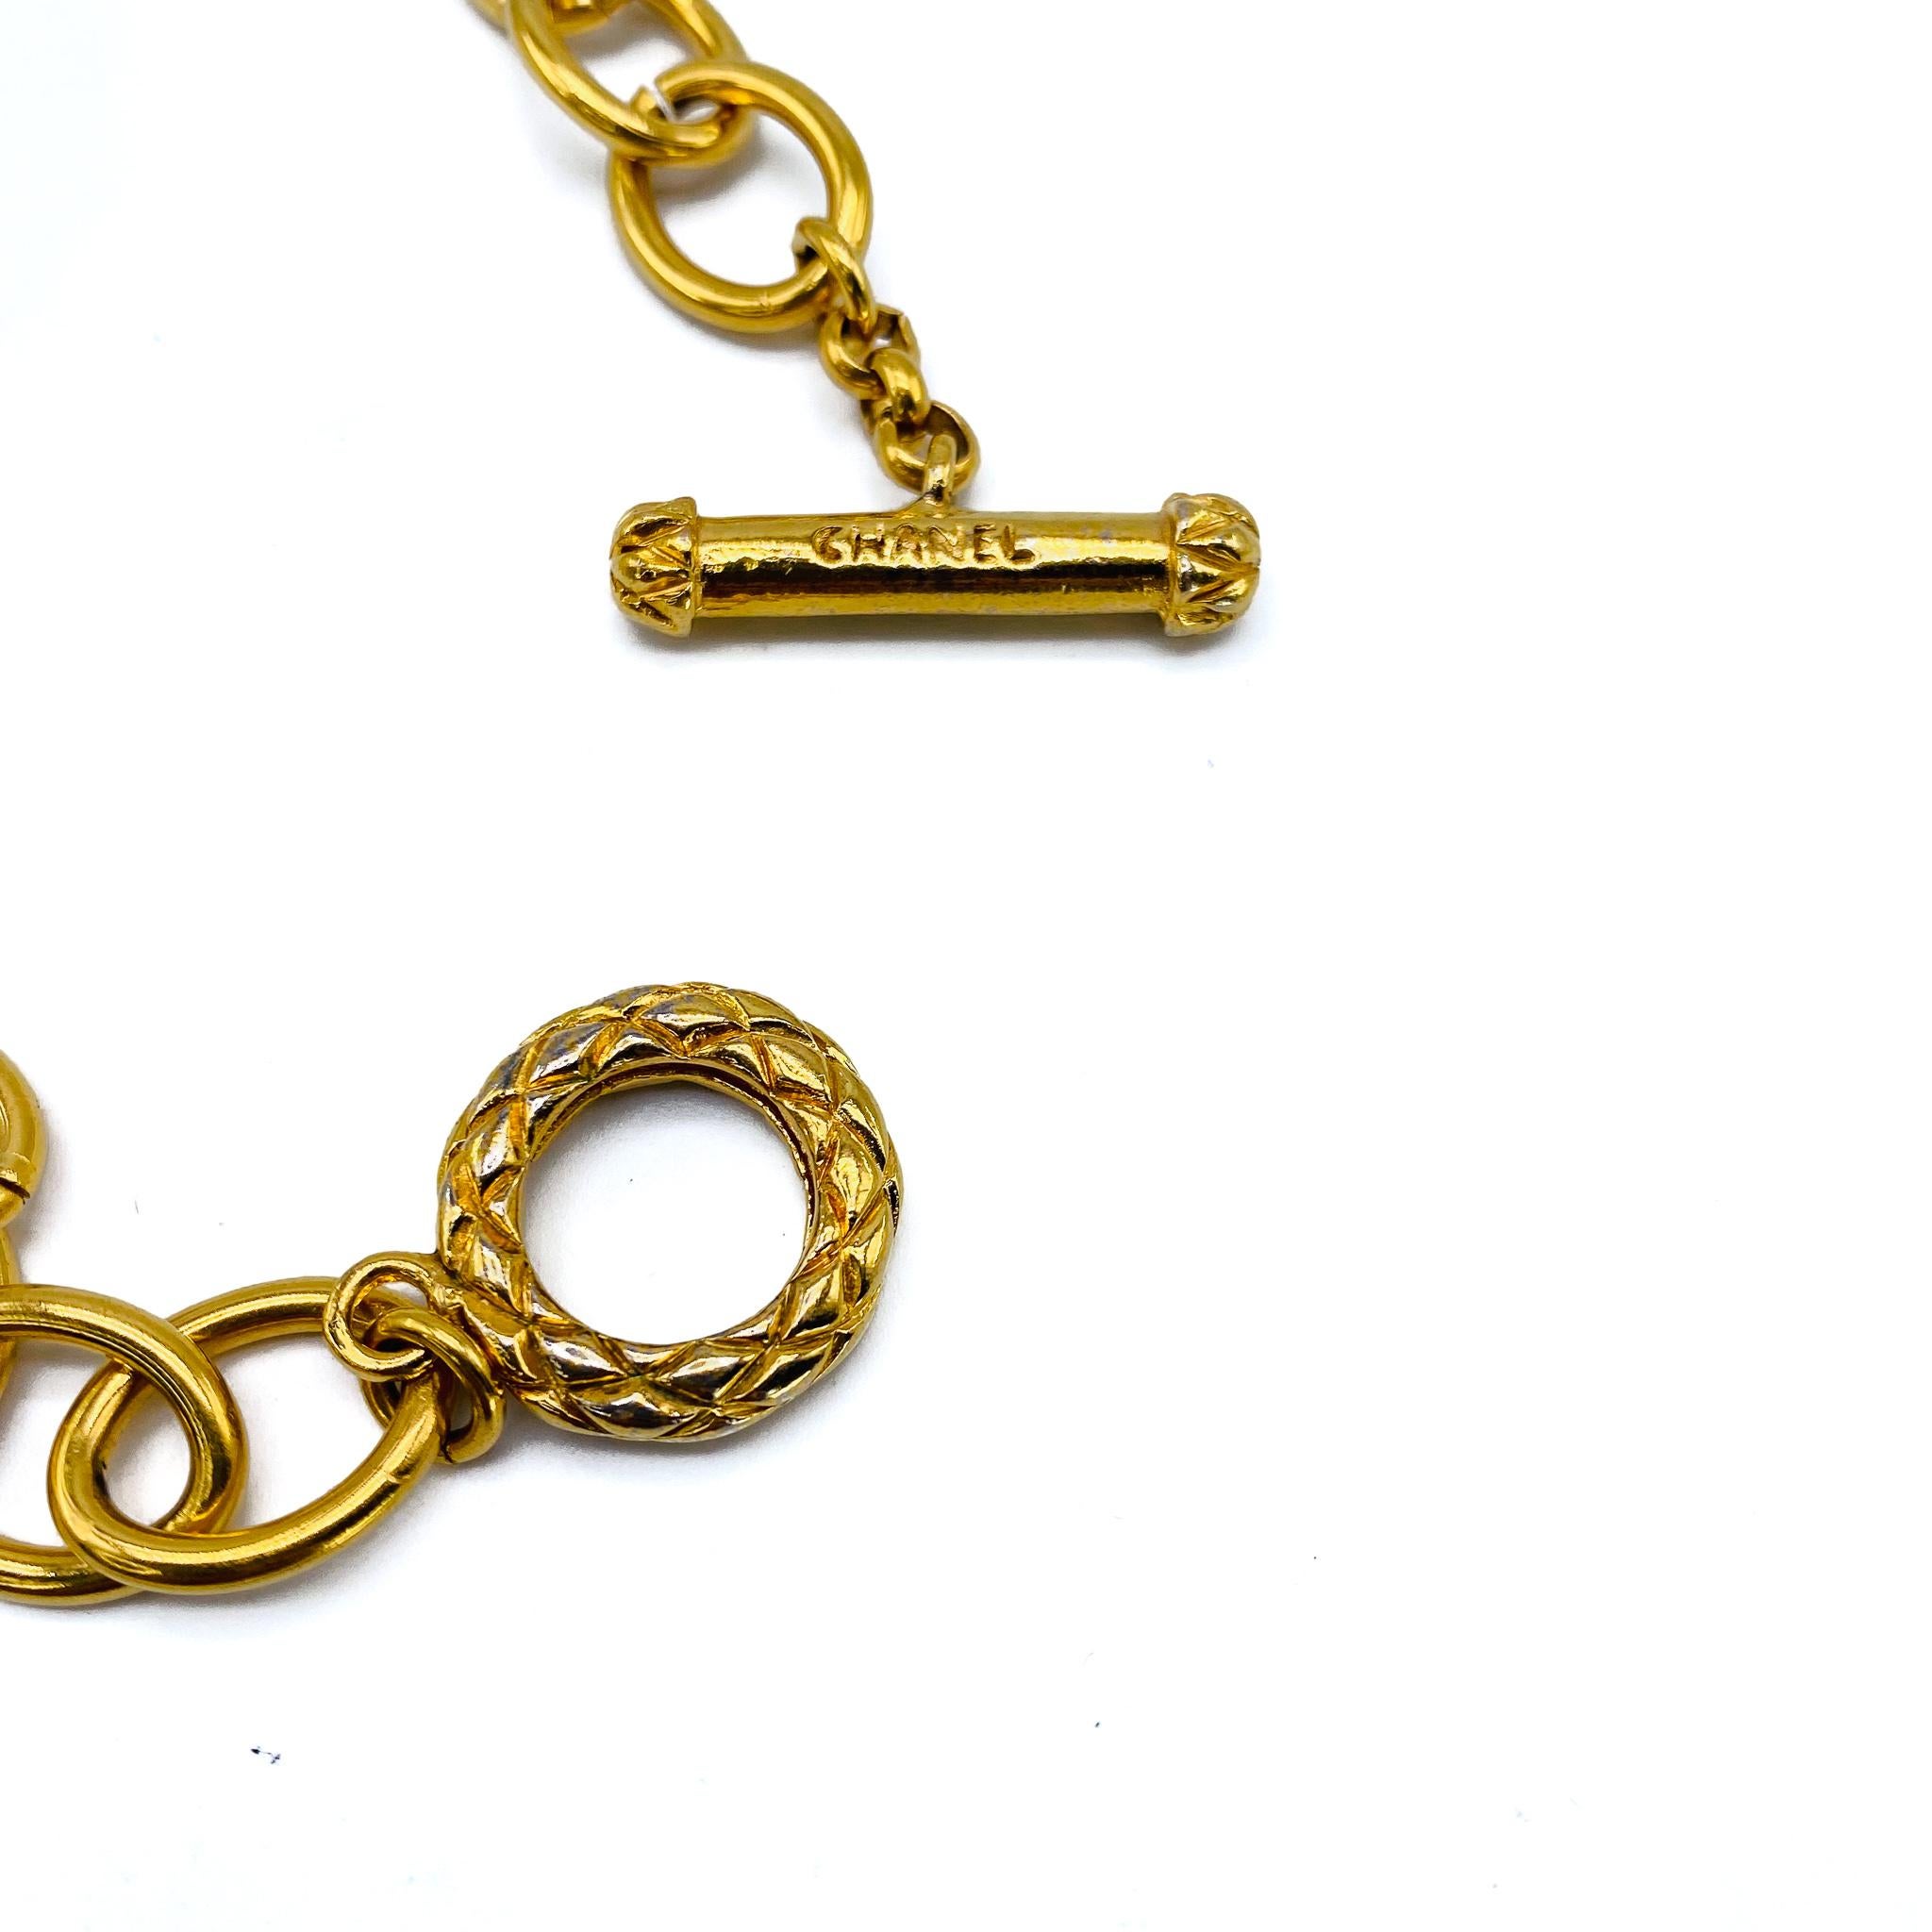 Women's Vintage Chanel Necklace 1990s - 1995 Spring Summer Collection